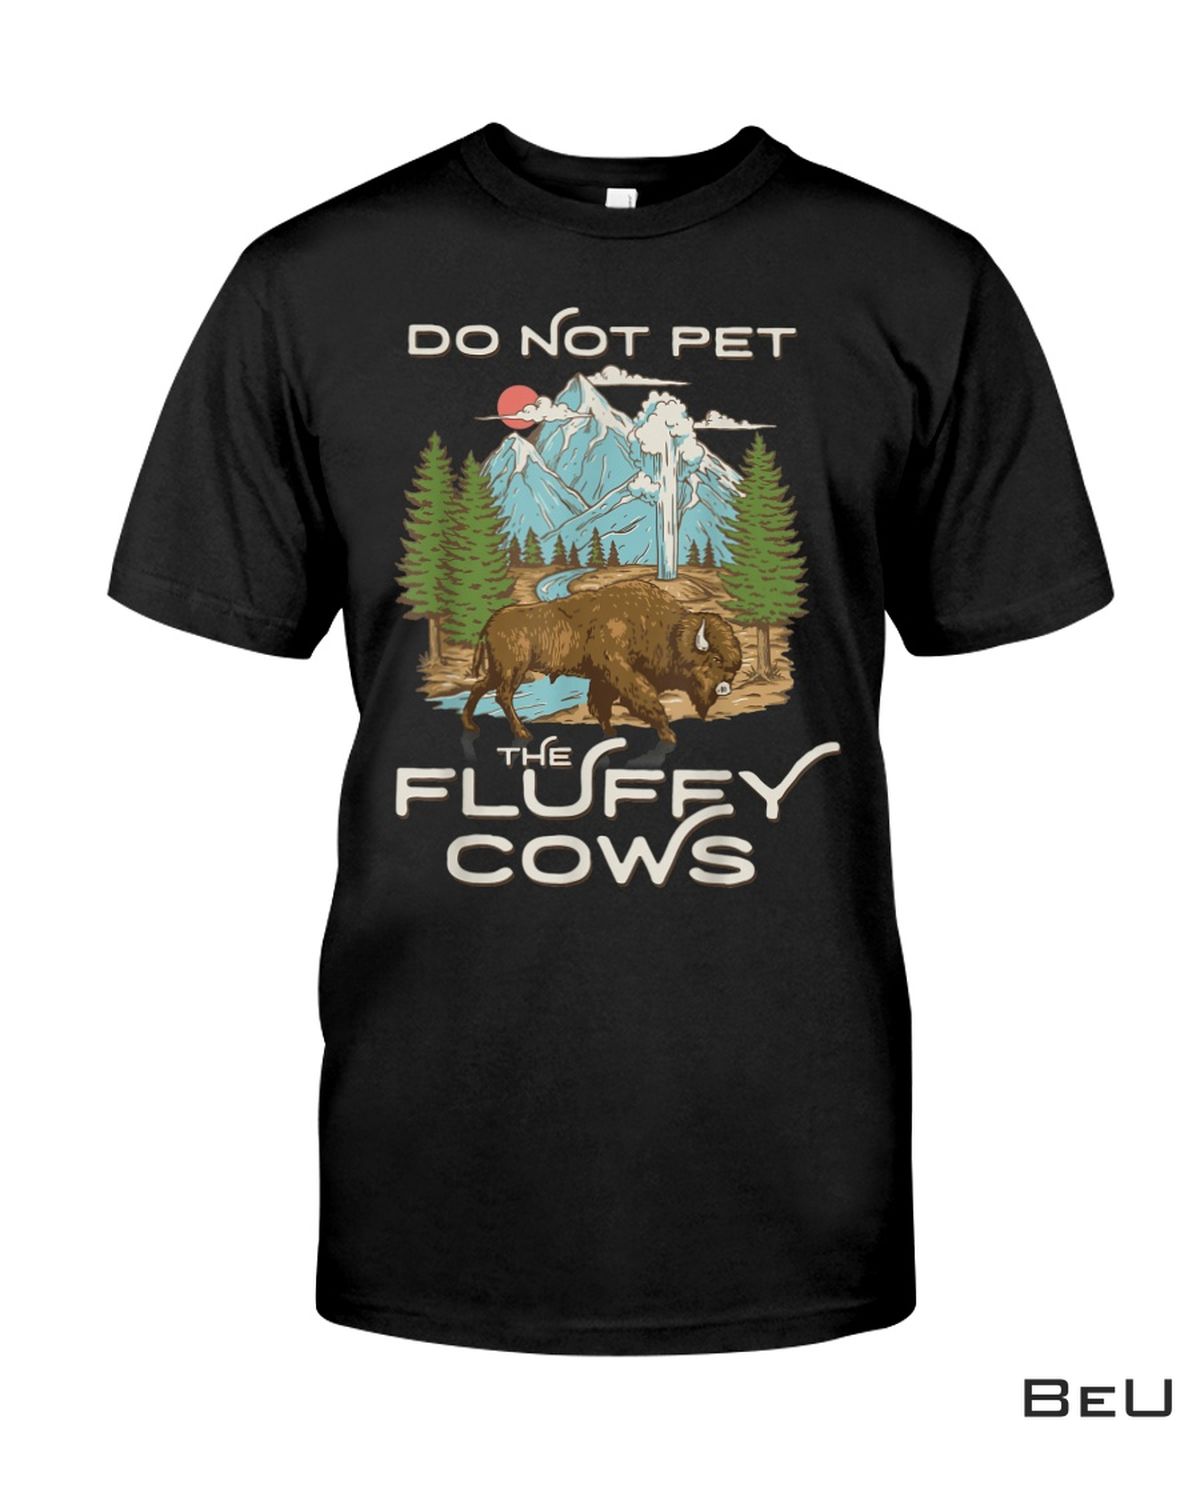 Yellowstone National Park Bison Do Not Pet The Fluffy Cows Shirt